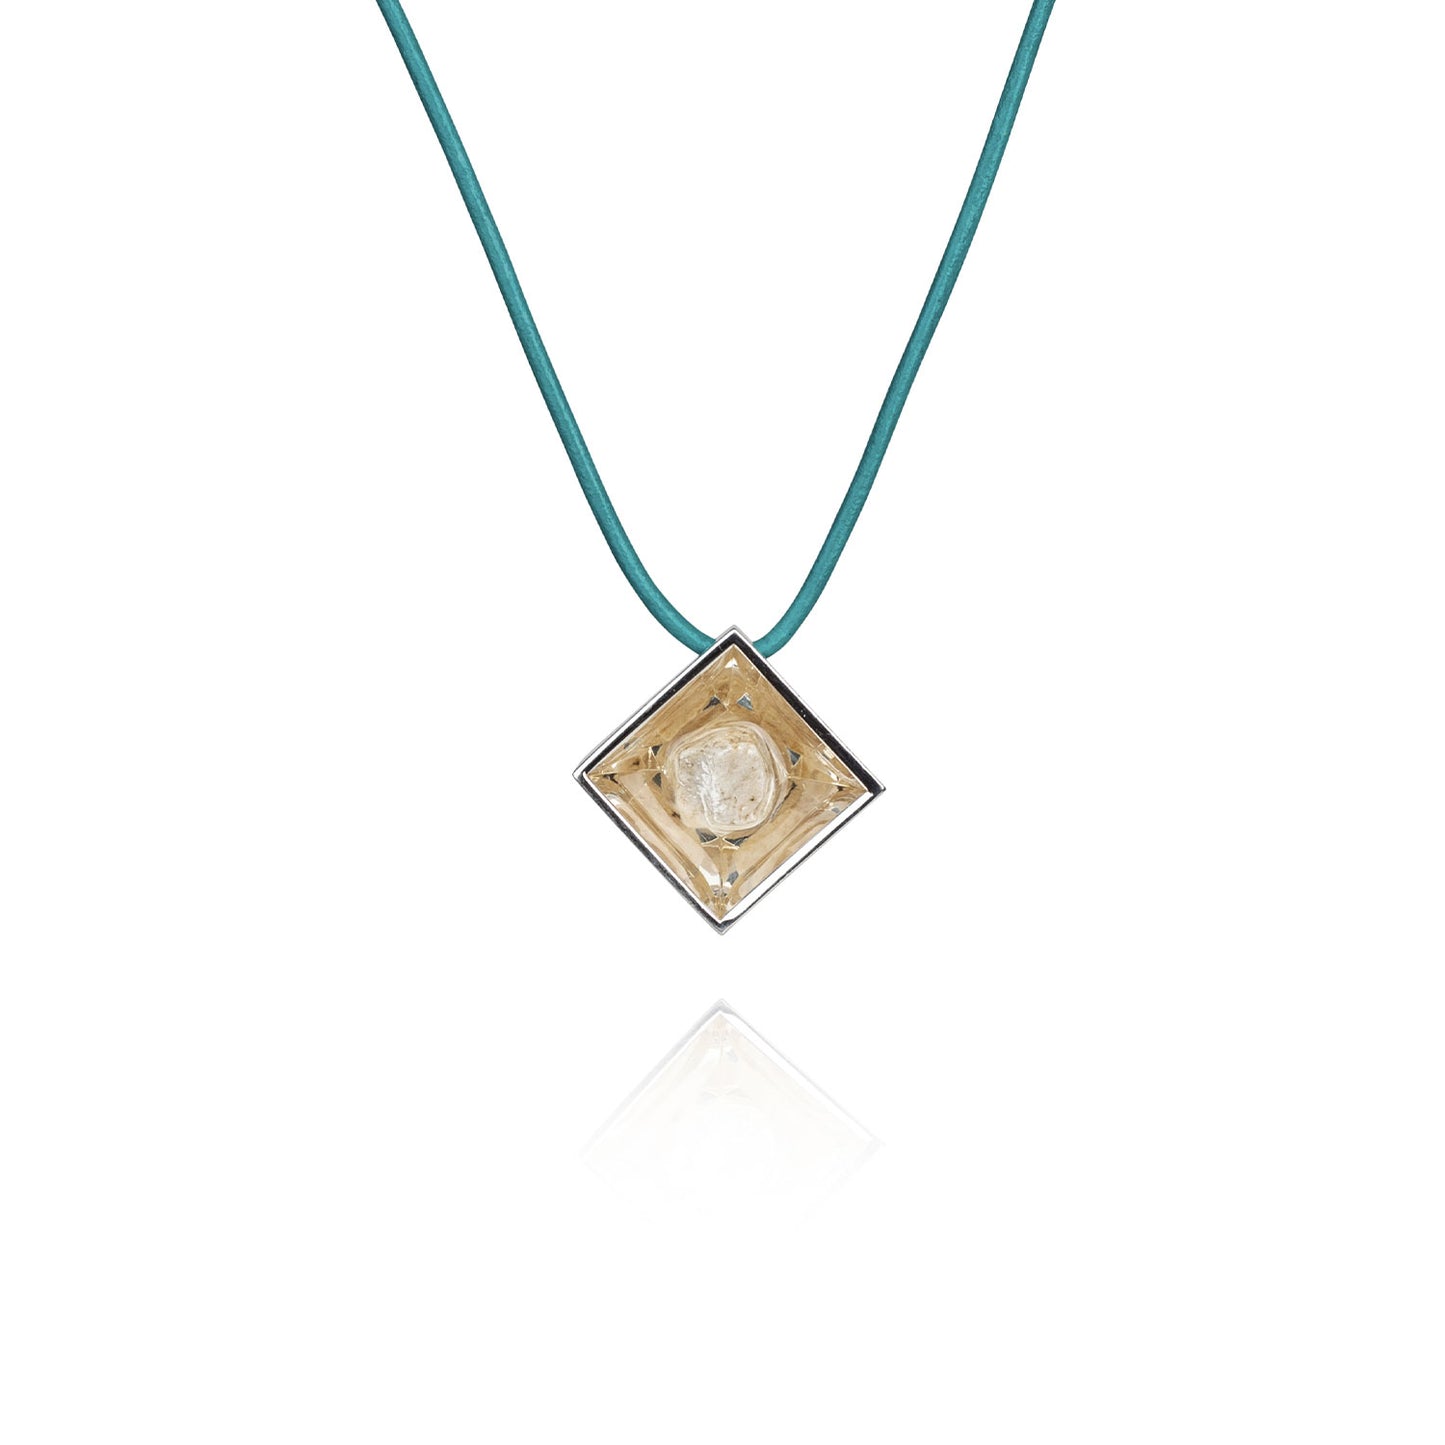 A small natural tan stone sitting in the middle of a diamond shaped metal pendant in a silver color. The pendant is hanging on a turquoise leather necklace.